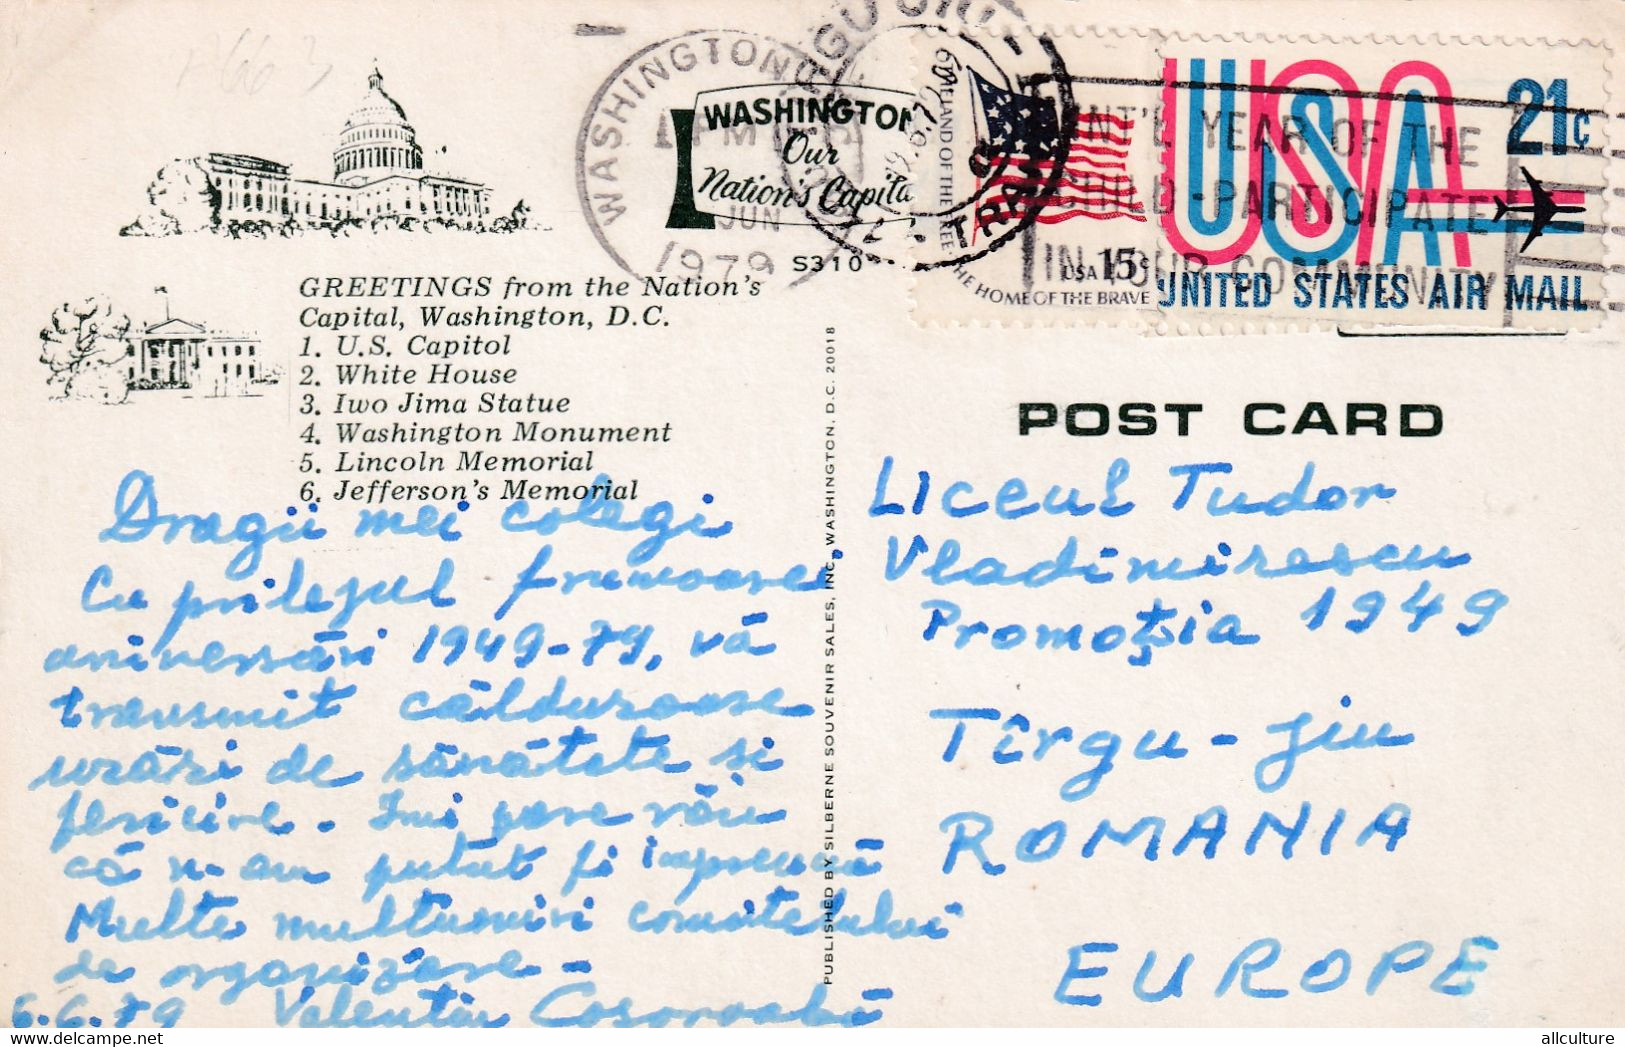 A8184 - WASHINGTON D.C. US CAPITOL, WHITE HOUSE,MONUMENTS, LINCOLN MEMORIAL, 1979 AIR MAIL USA STAMPS, SENT TO ROMANIA - Cartas & Documentos